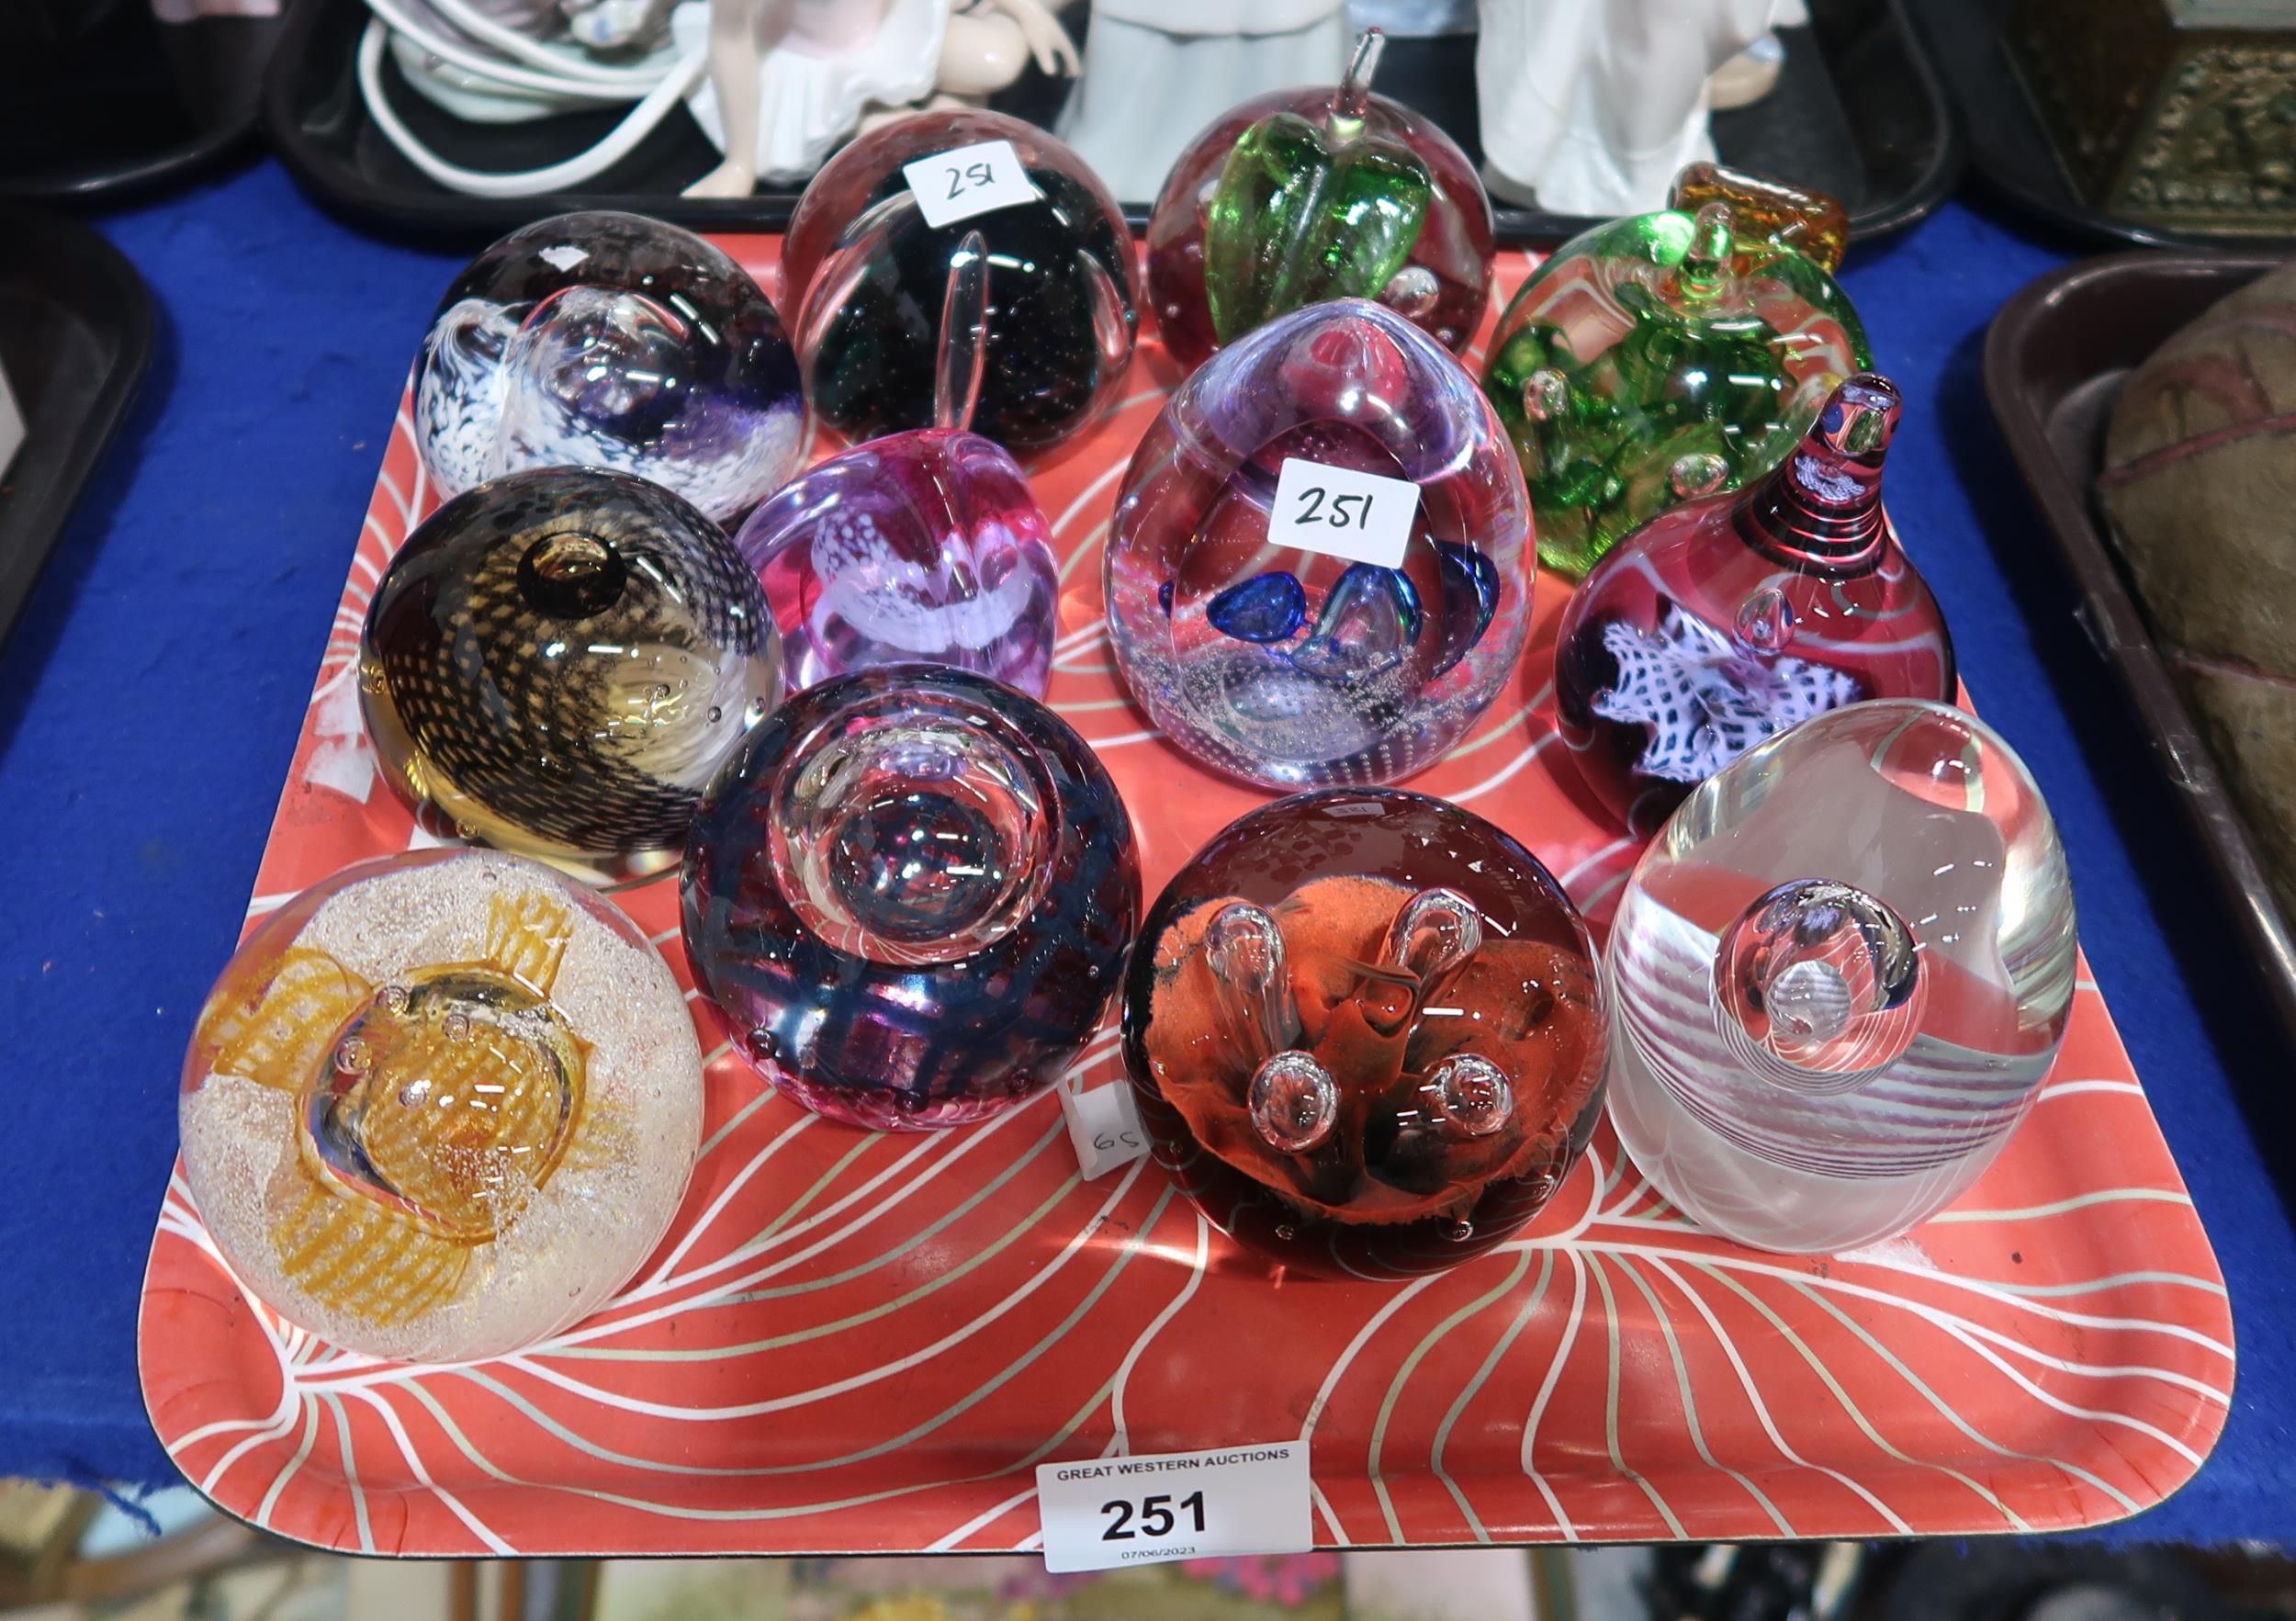 Assorted paperweights including Caithness Desperado, Windfall, Distraction, Saracen, Caledonia etc